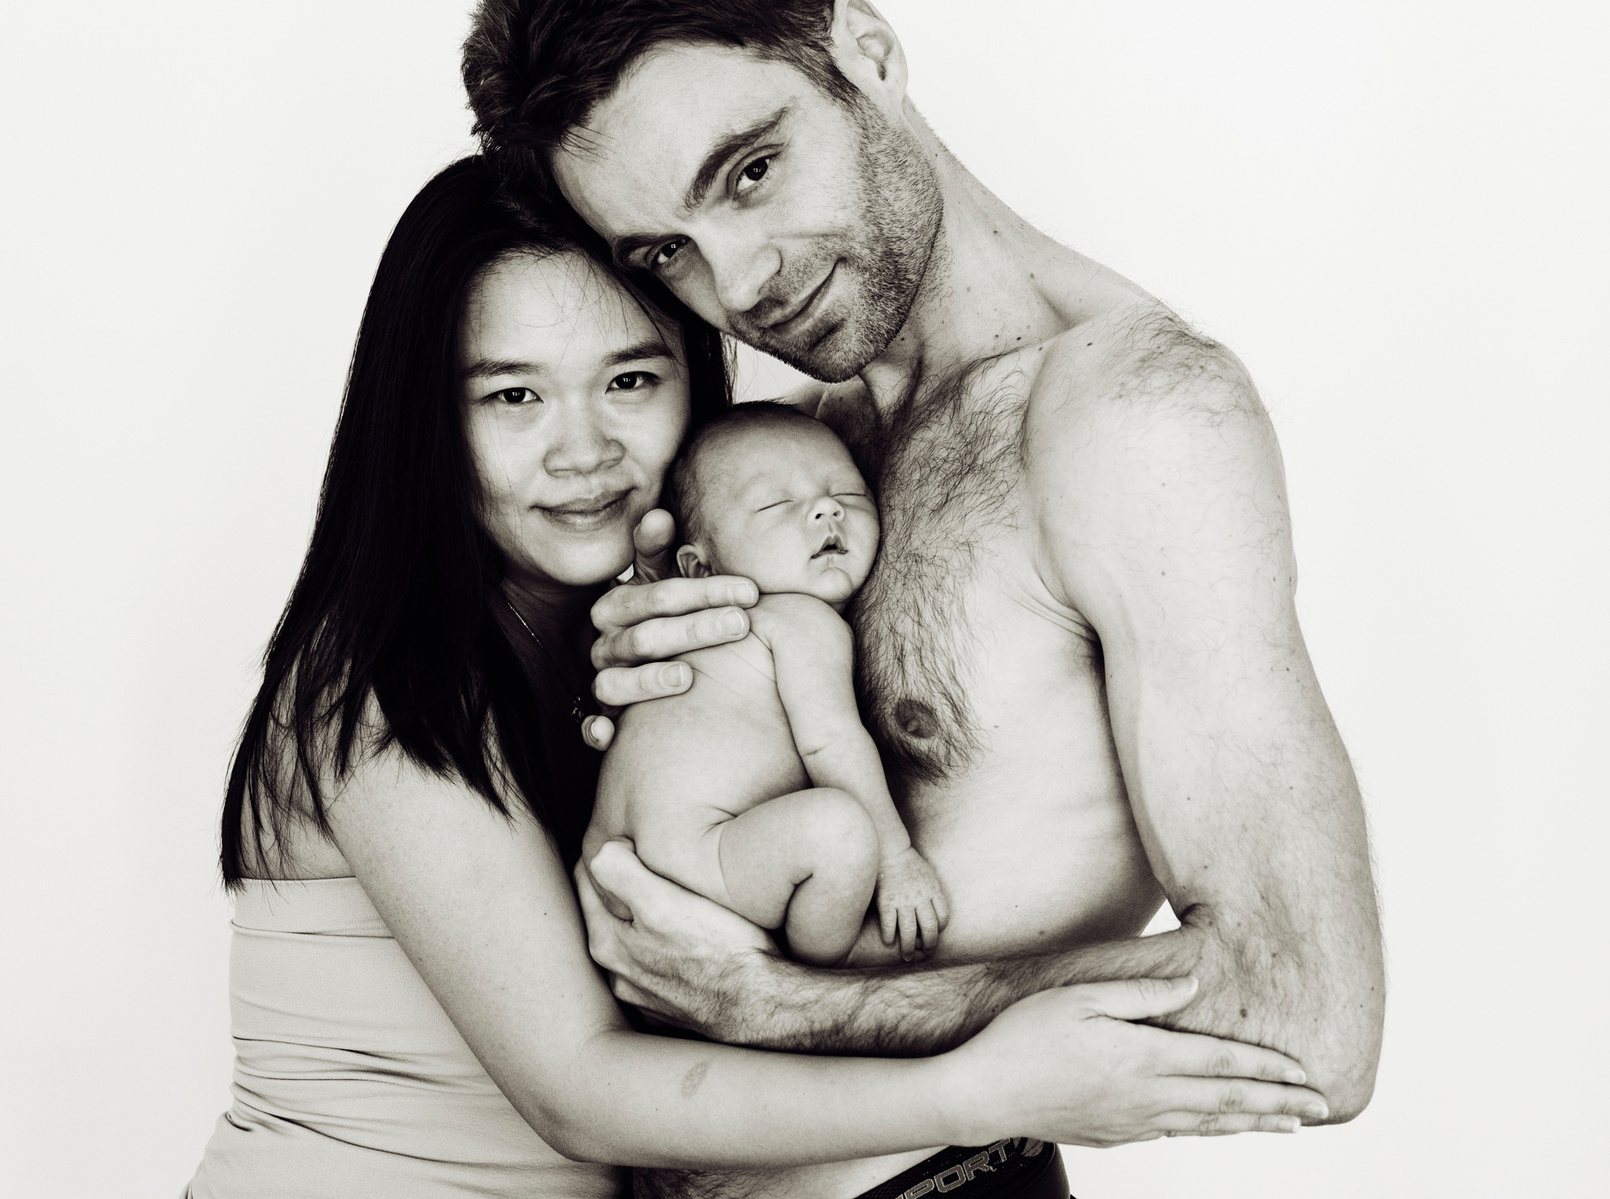 Loving parents pose for a family portrait, the father holds his newborn son close to his bare chest for their first professional portrait as a family. Photographed by Geneva's leading portrait photographer, Helen Putsman, based in Chêne-Bougeries.